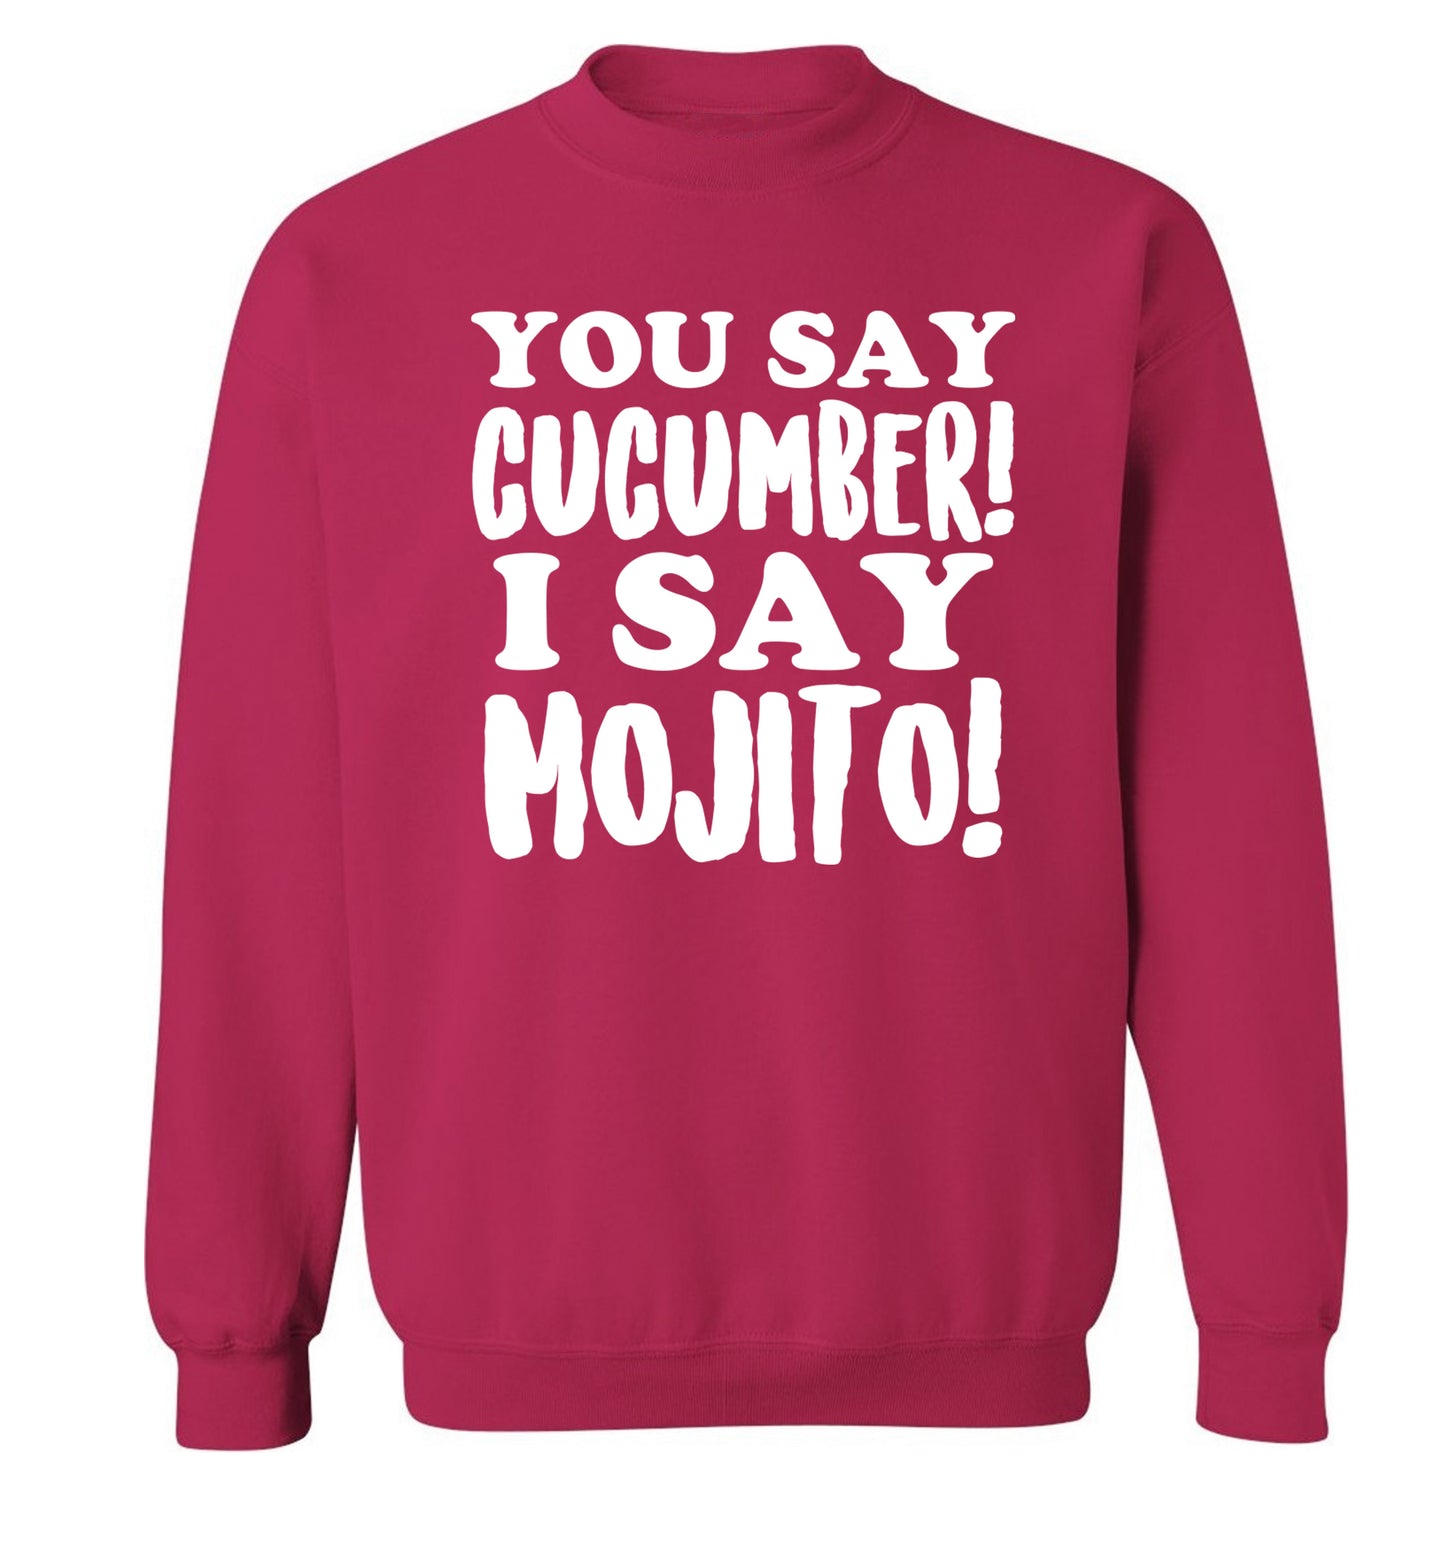 You say cucumber I say mojito! Adult's unisex pink Sweater 2XL